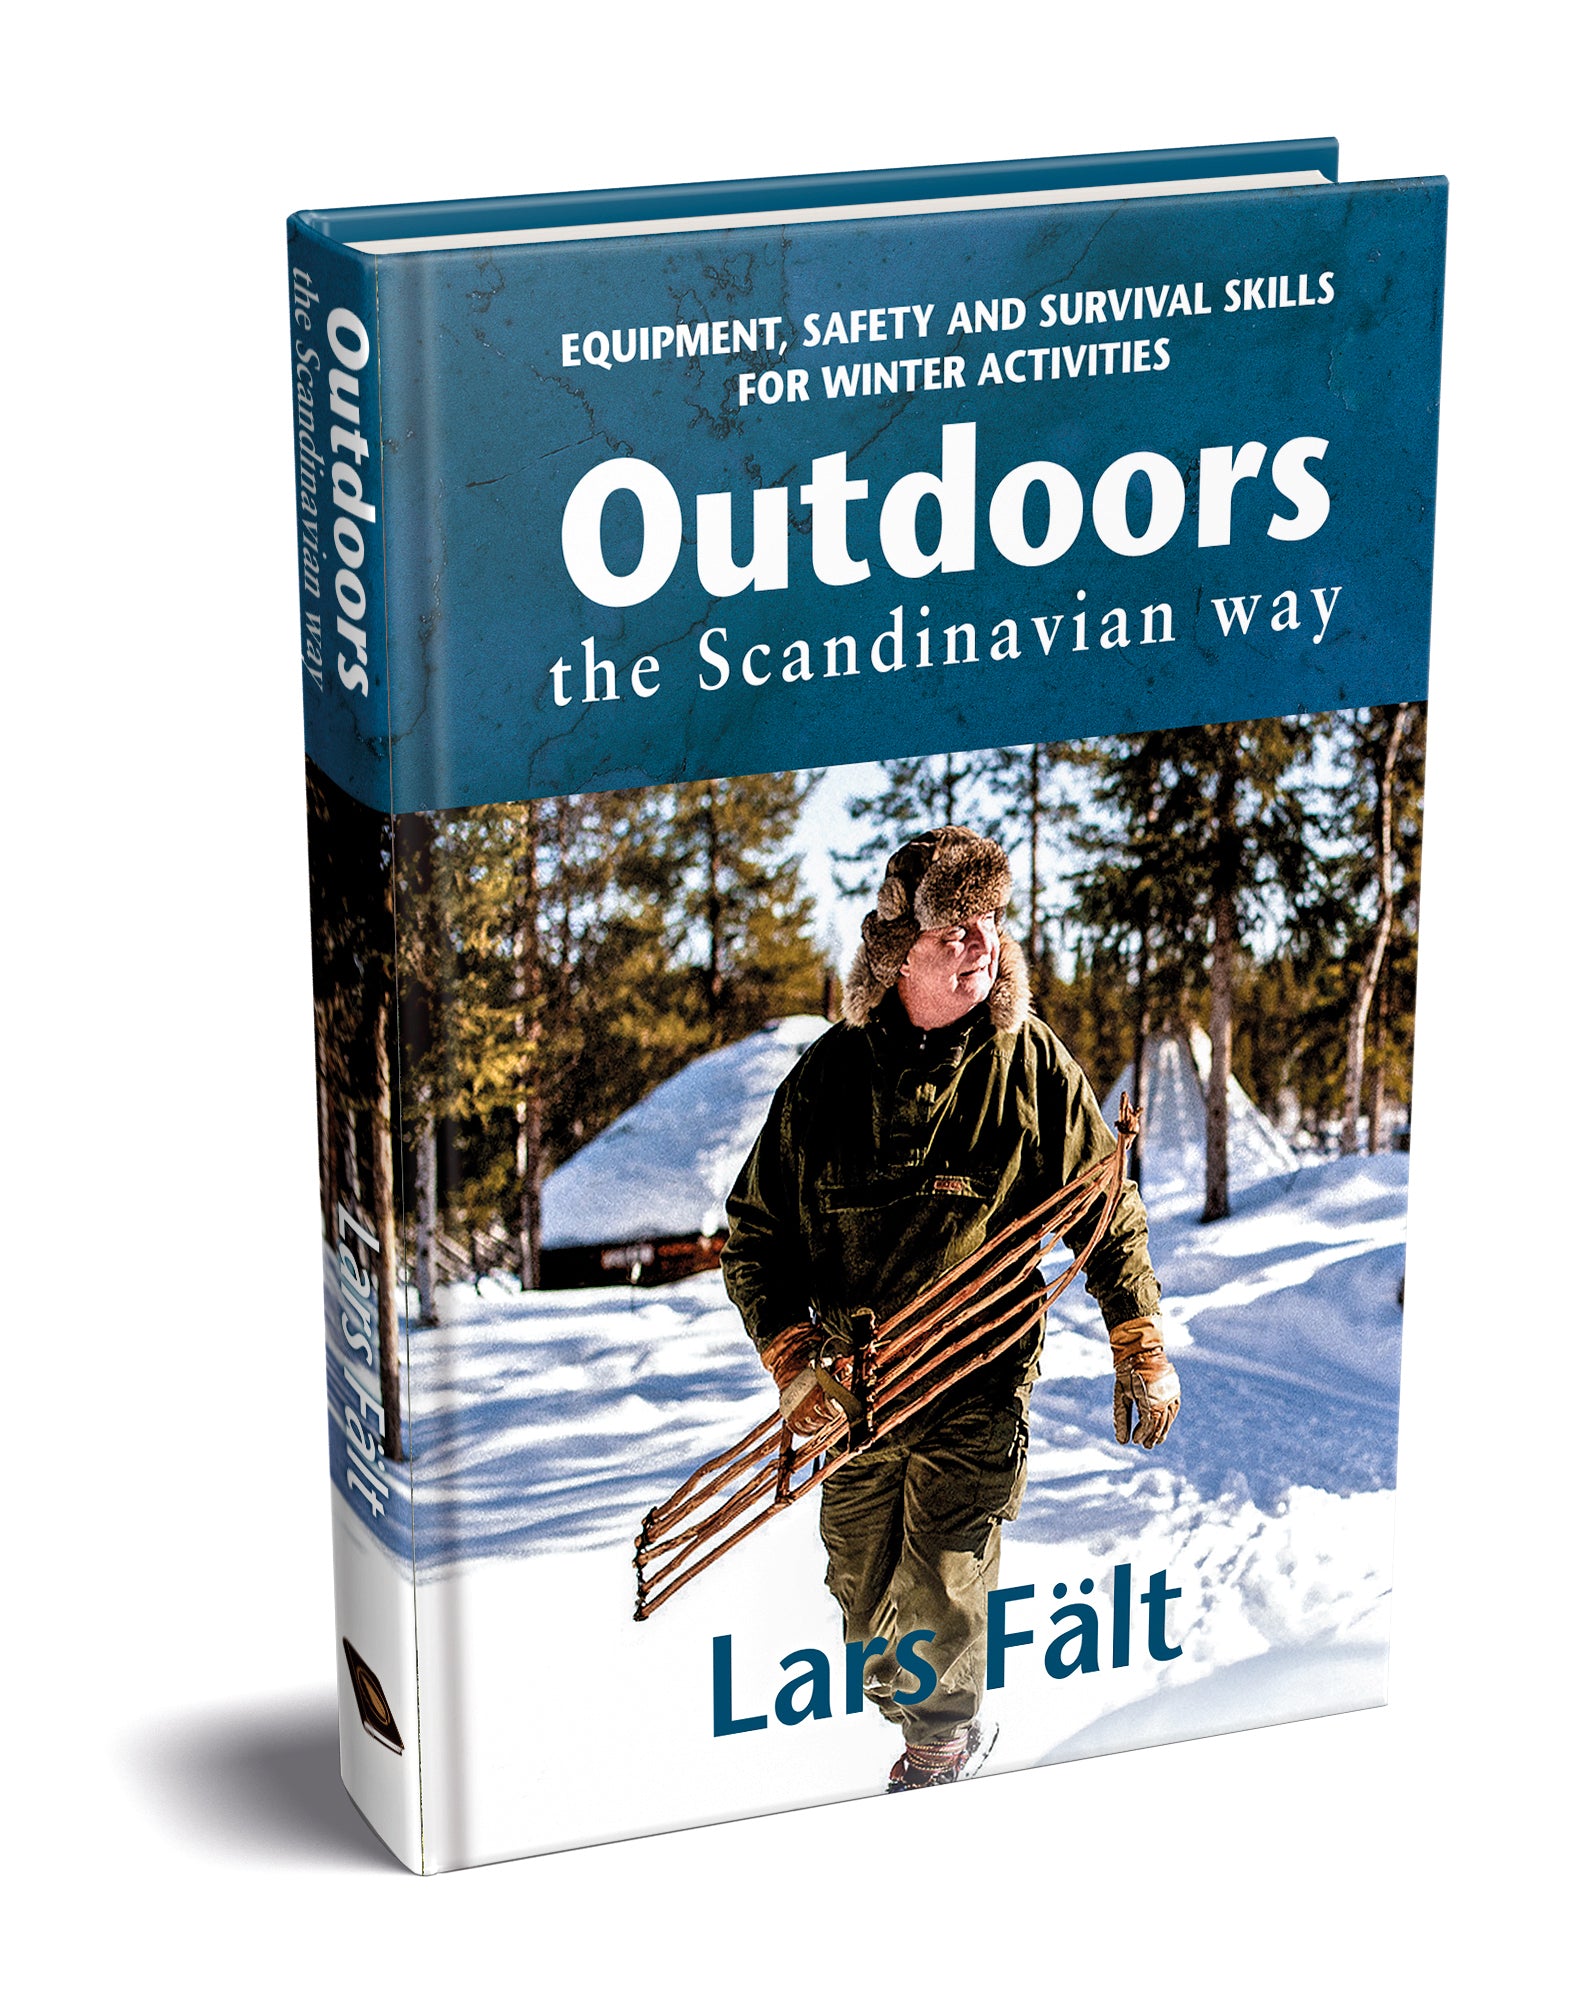 Outdoors the Scandinavian Way by Lars Fält - Winter Skills front cover of book